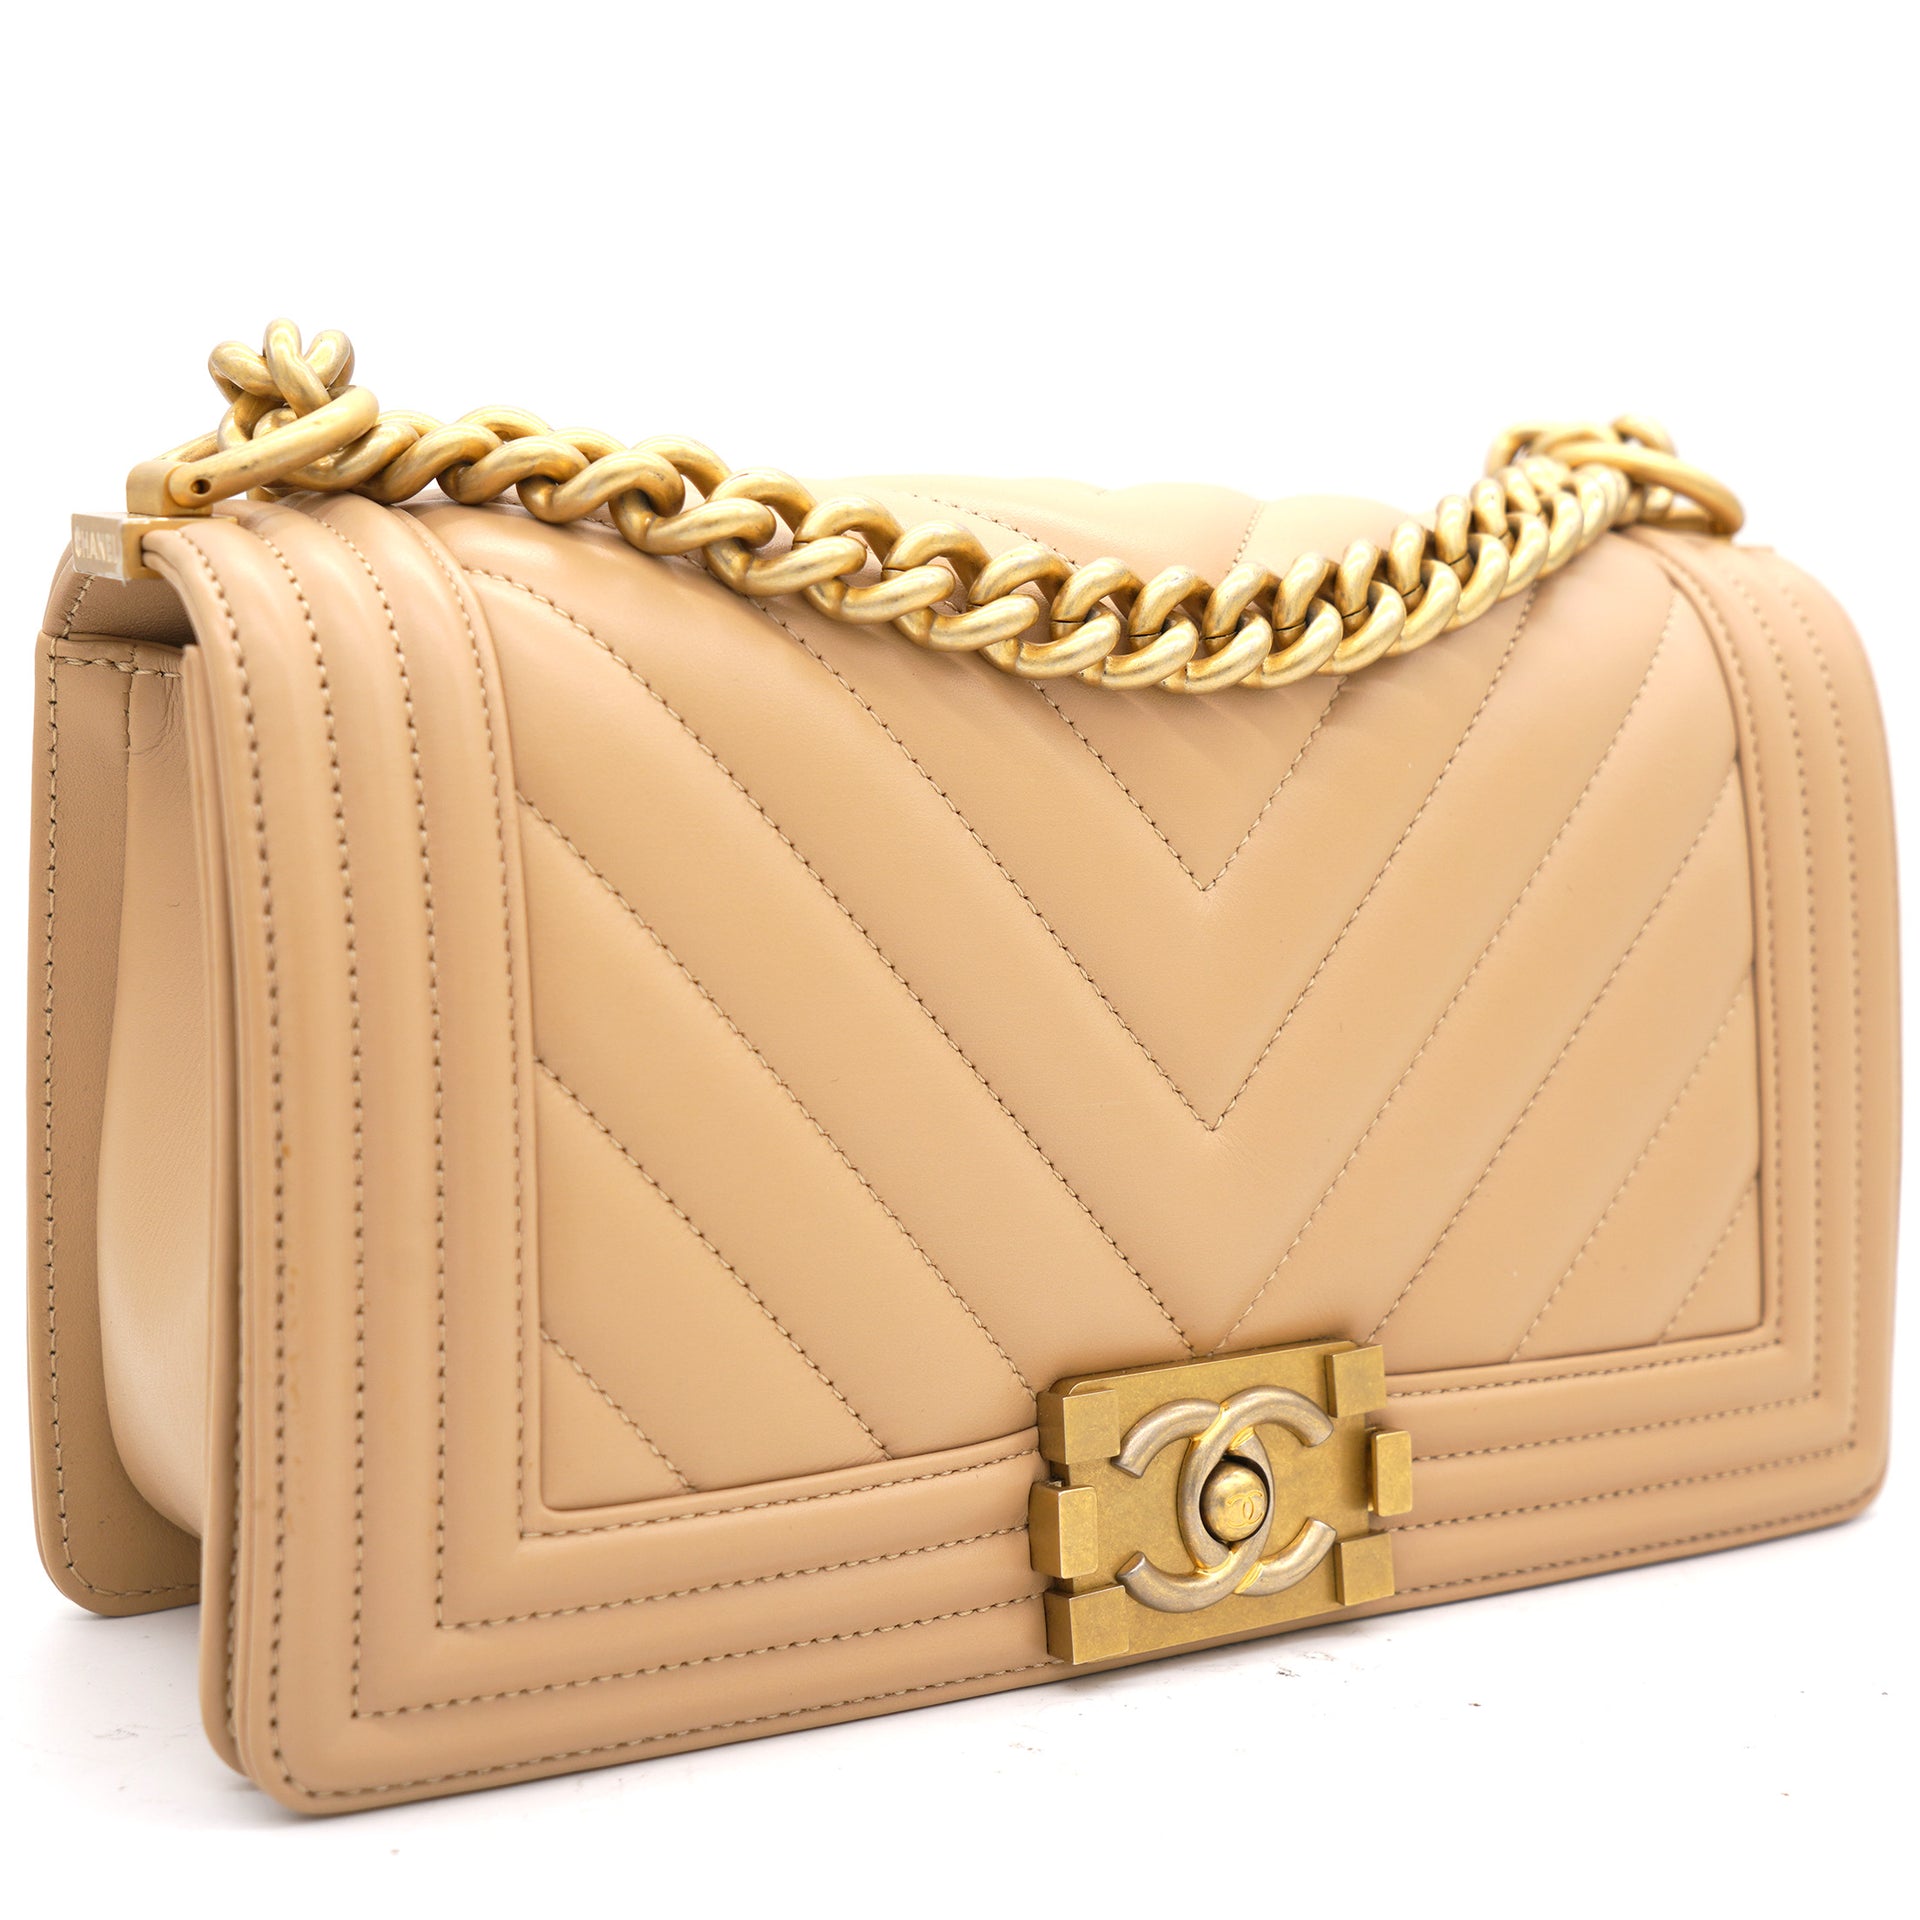 Chanel Quilted Medium Boy Dusty Pink Caviar Gold Hardware – Coco Approved  Studio